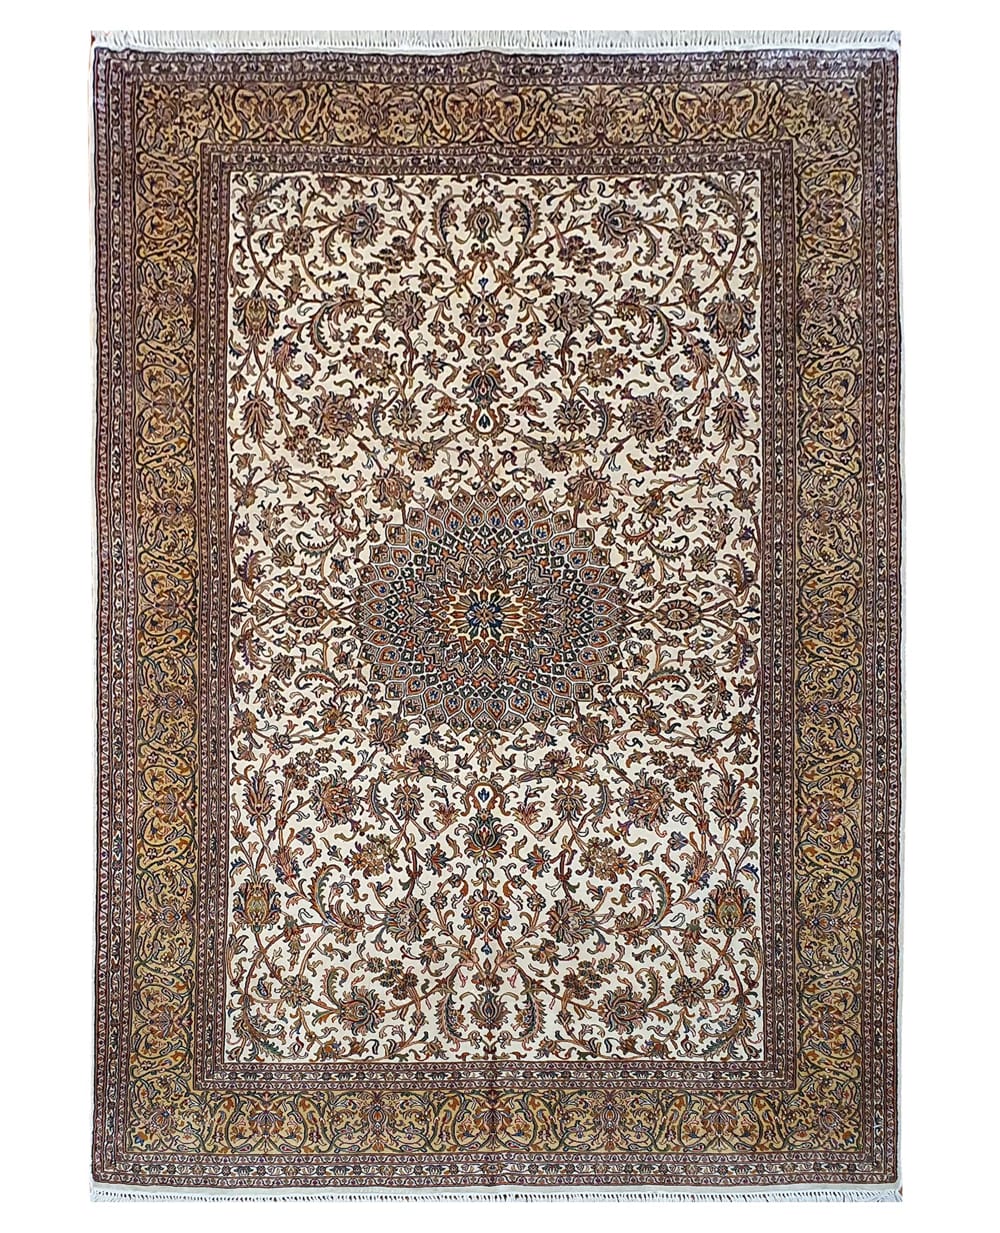 Rug# 30016, Superfine Kashmir silk on silk, total 3,076,800 knots, Mogul tree of life , size 194x122 cm, RRP$9000, on special $3550 (2)